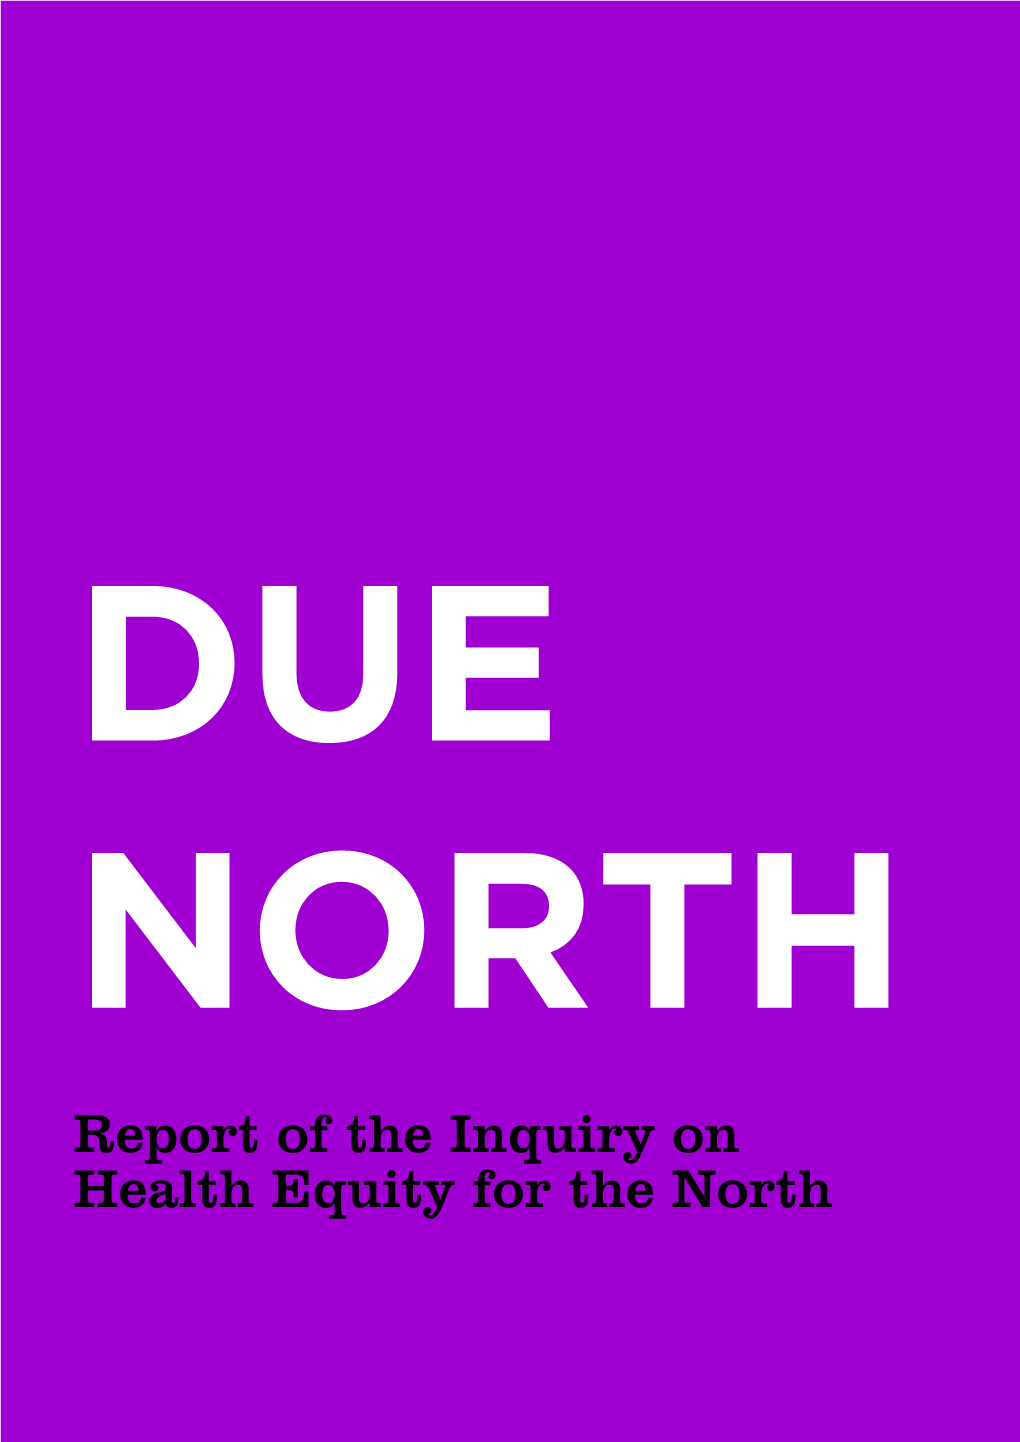 Due North: Inquiry on Health Equity for the North